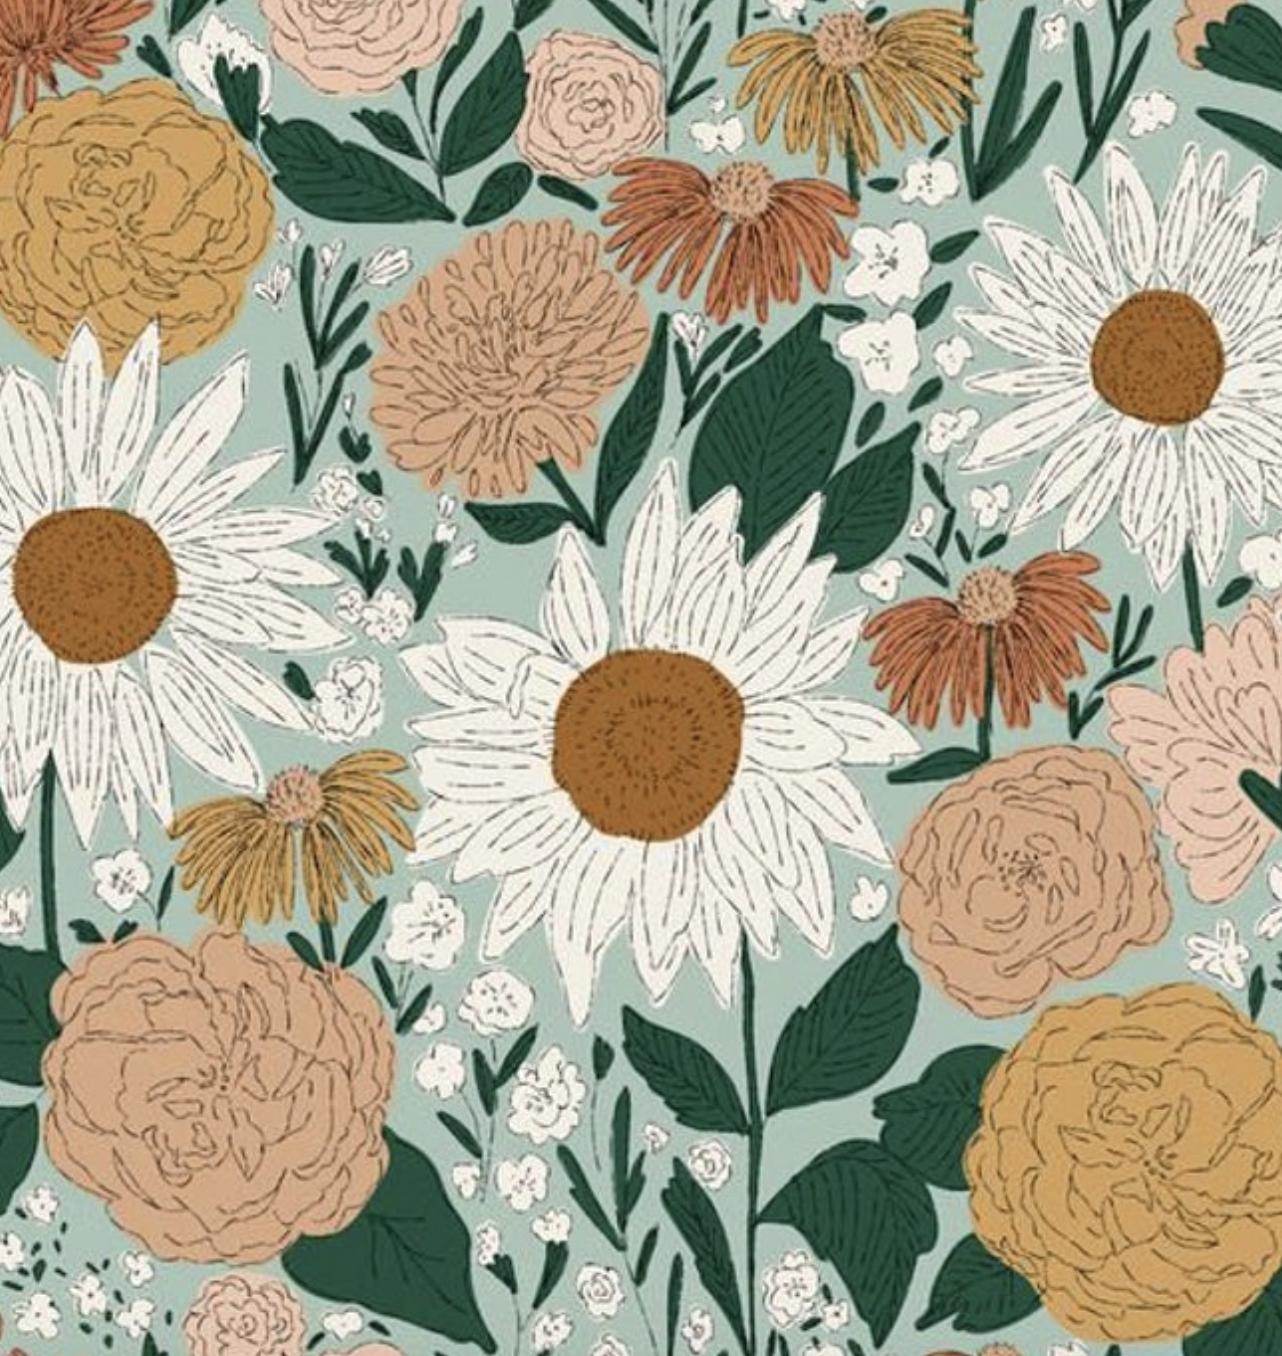 1282 x 1356 · png - Pin by Emily Kenkel on Our home | Aesthetic iphone wallpaper, Floral ...